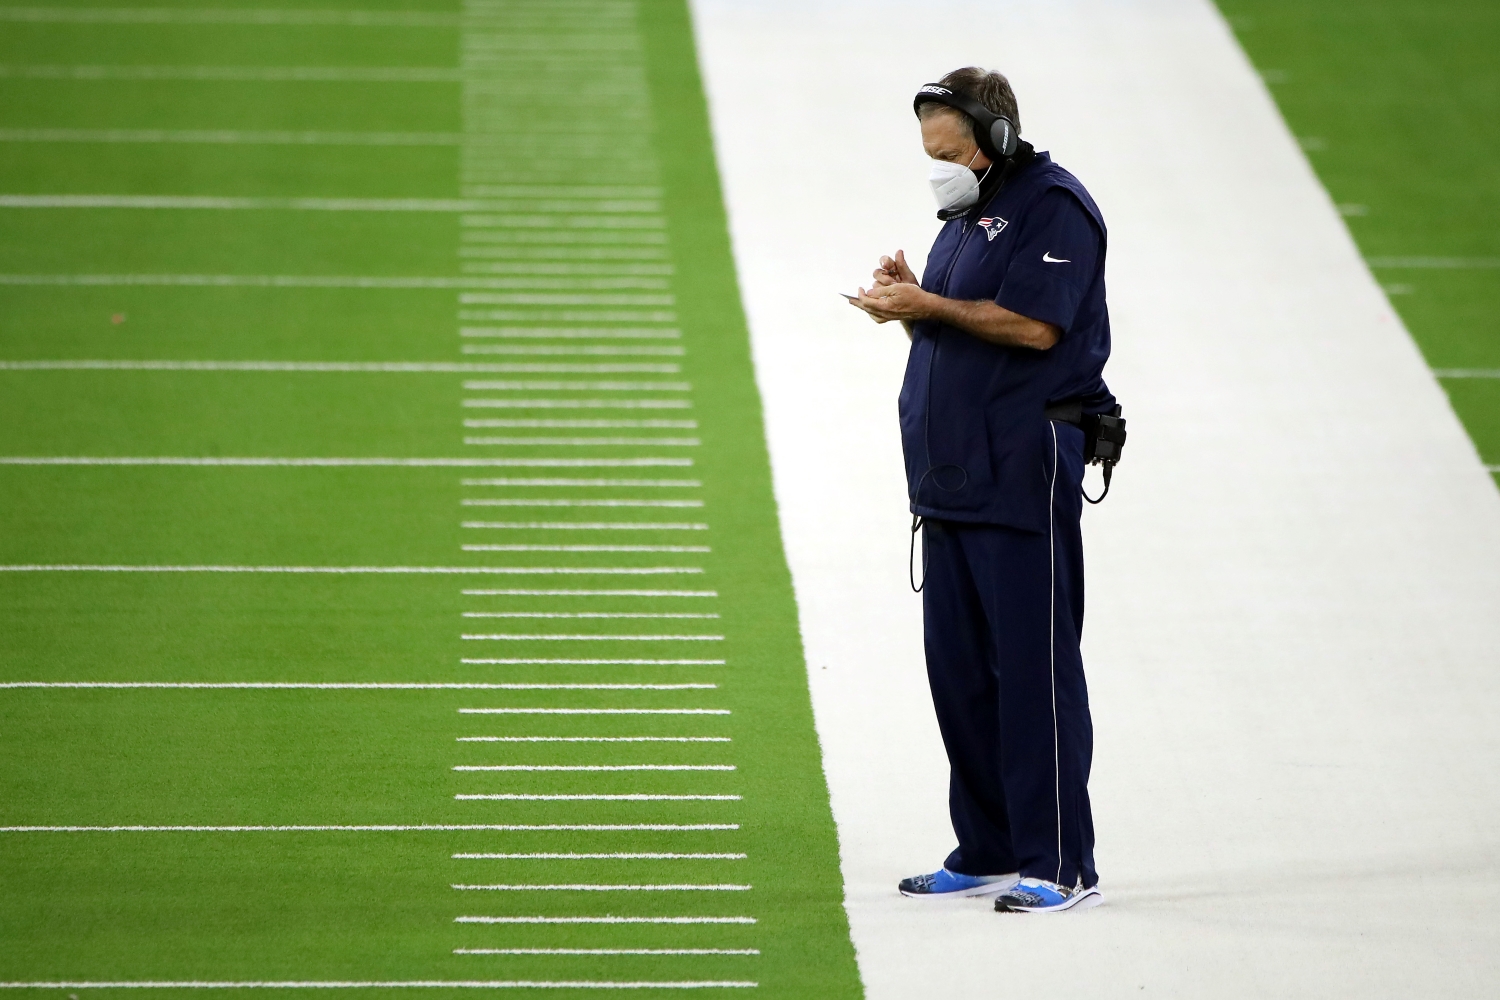 New England Patriots head coach Bill Belichick writes down notes while standing on the sideline.